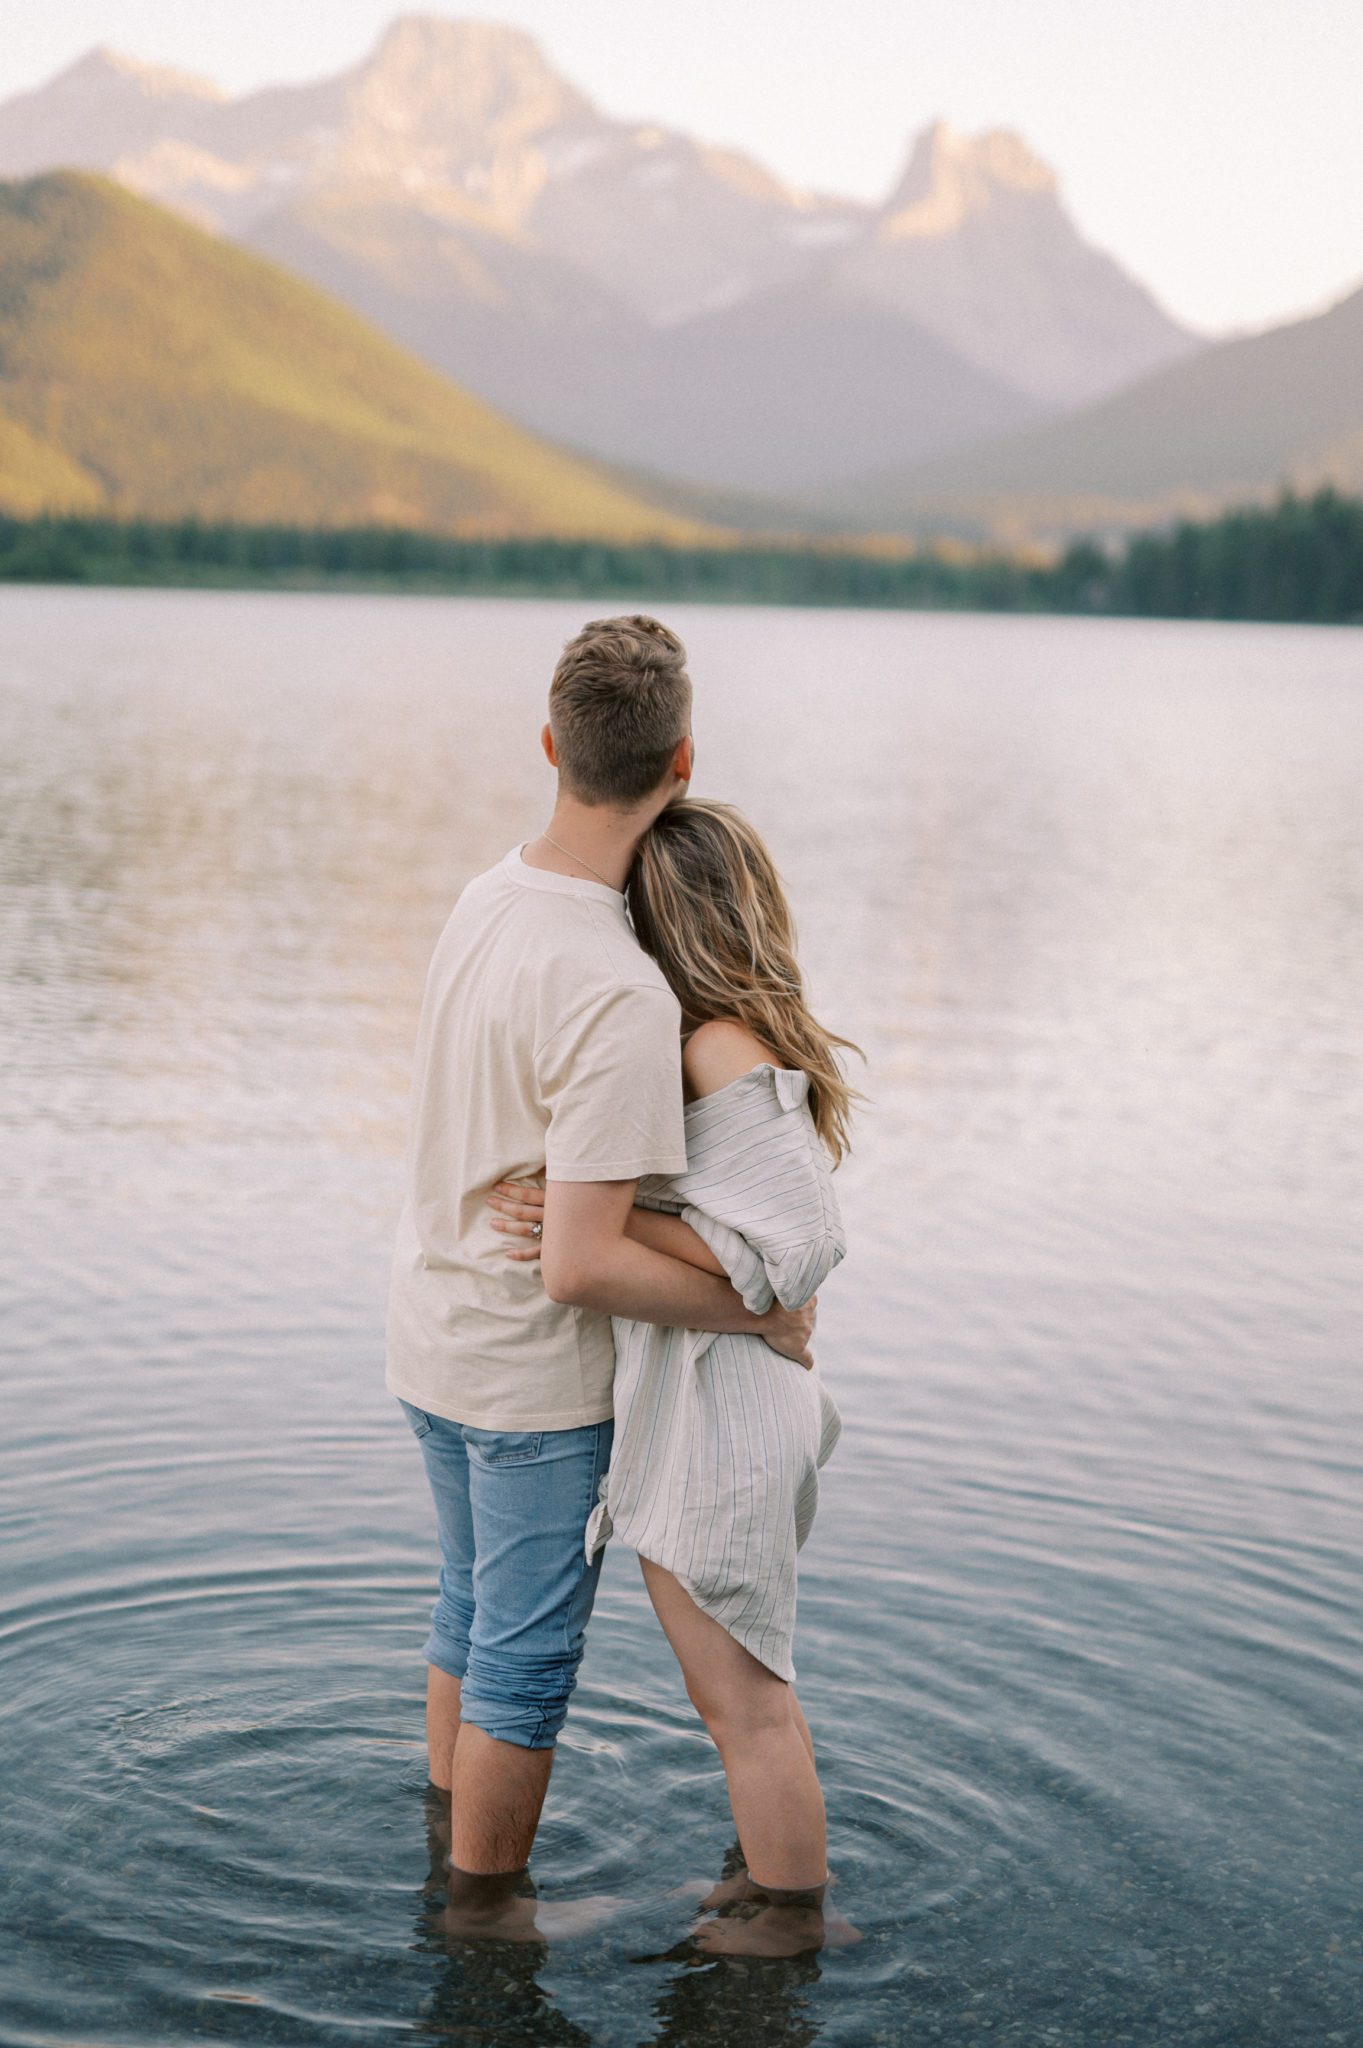 Sunset mountainside couples session in a lake